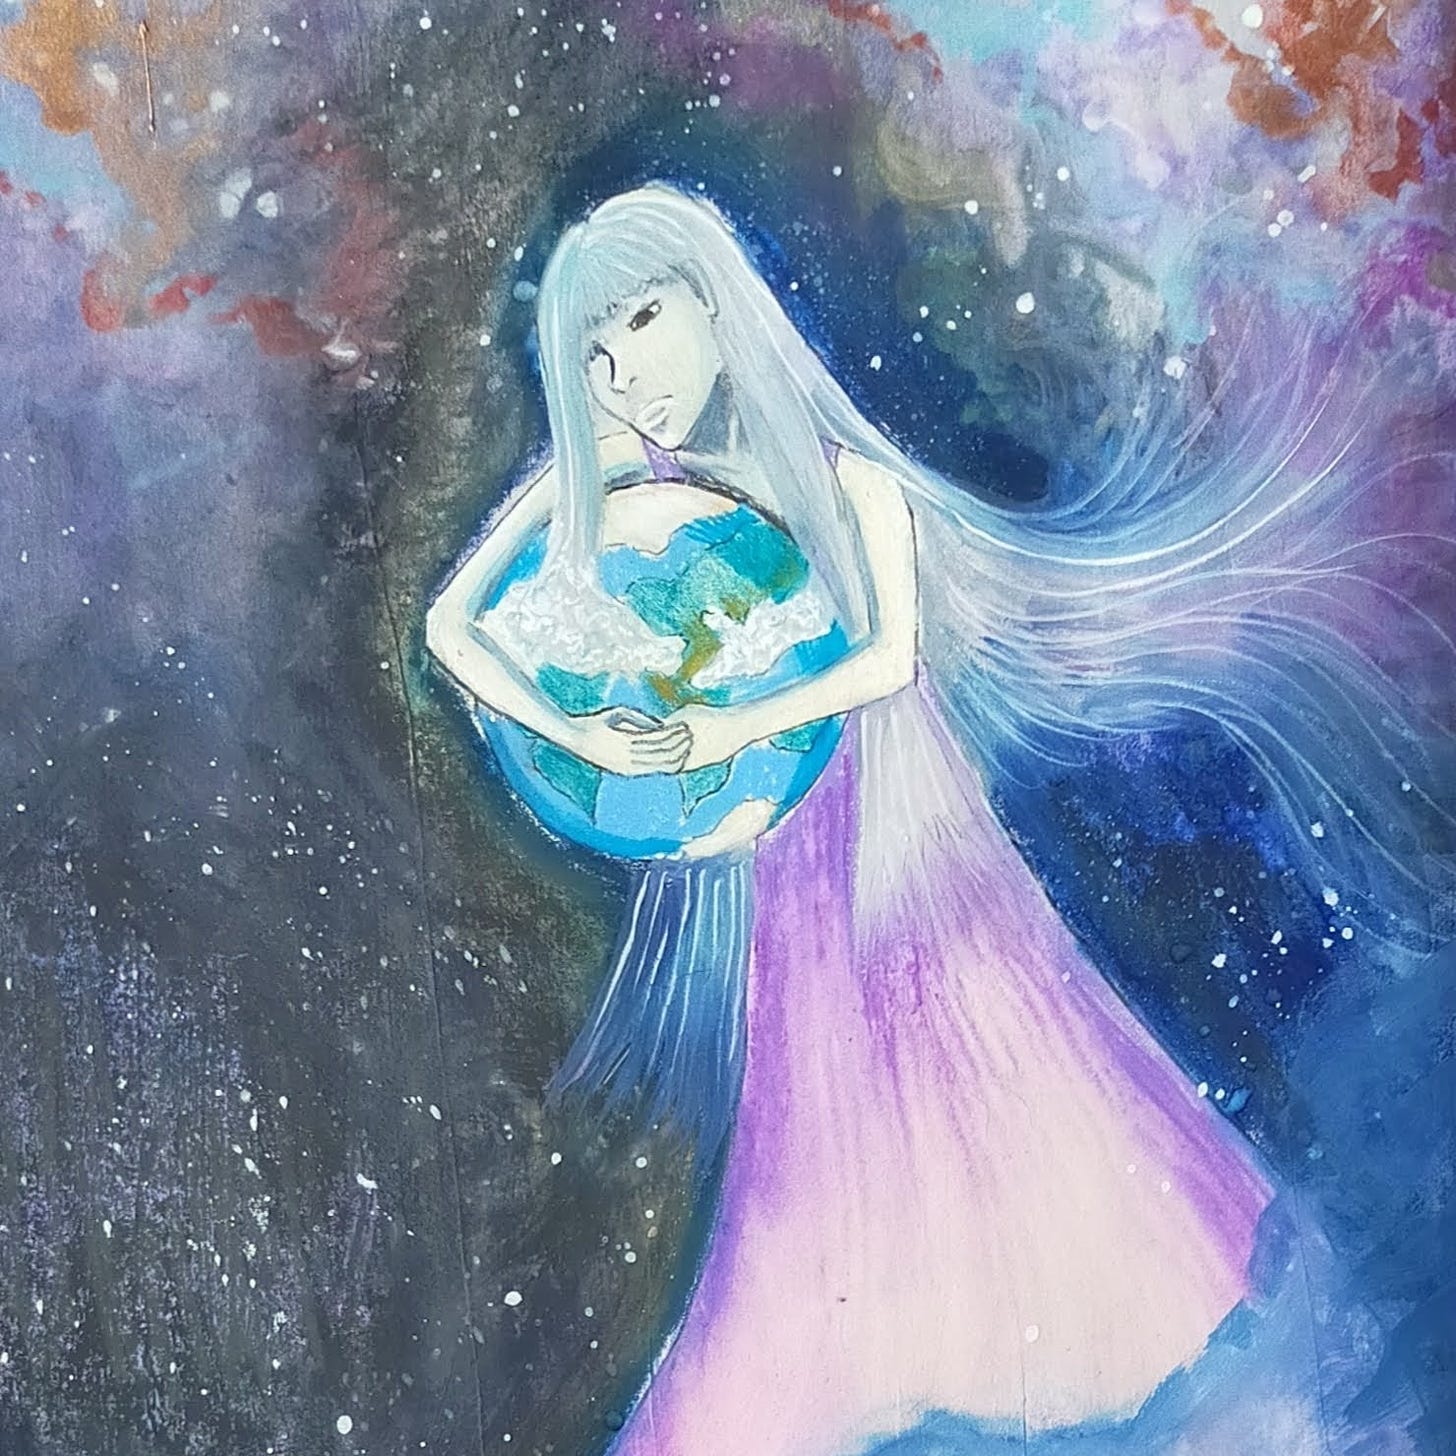 Illustration of a silver skinned woman with long grey hair enfolding the planet earth in her arms while behind her galaxies swirl.